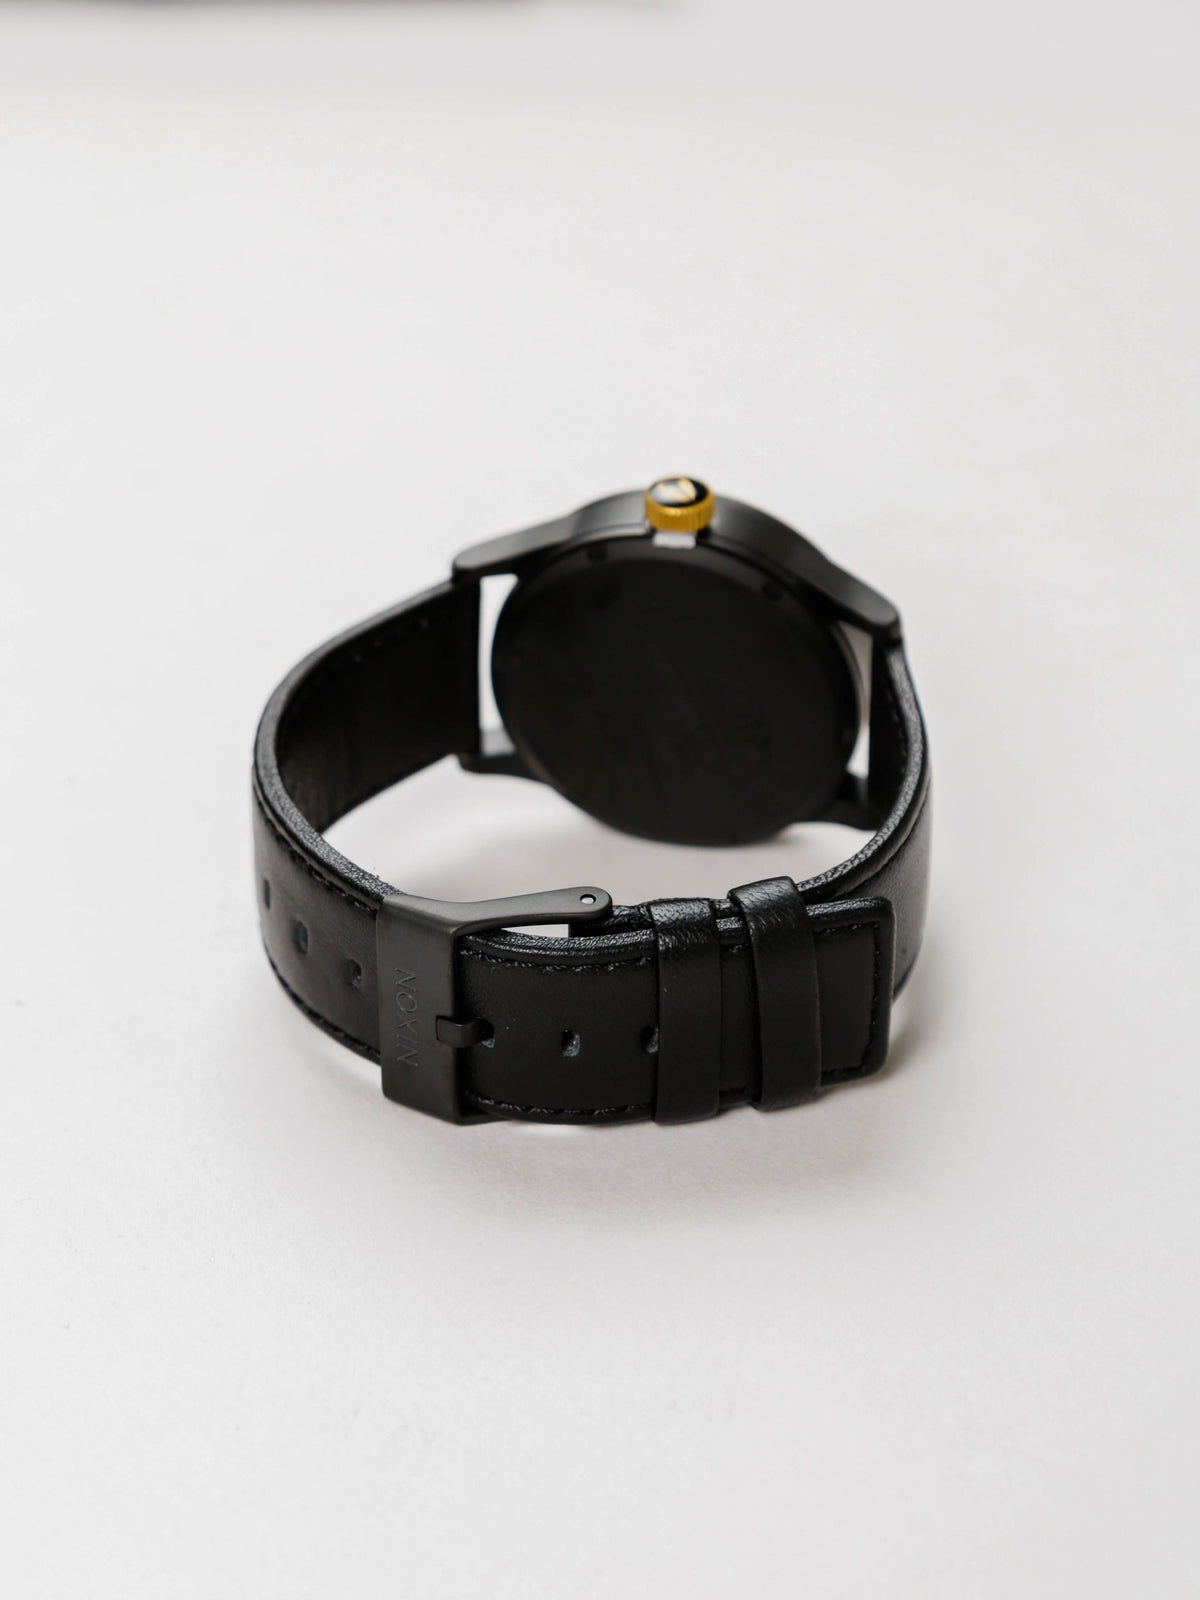 Sentry Leather 42mm Analogue Watch in Matte Black &amp; Gold